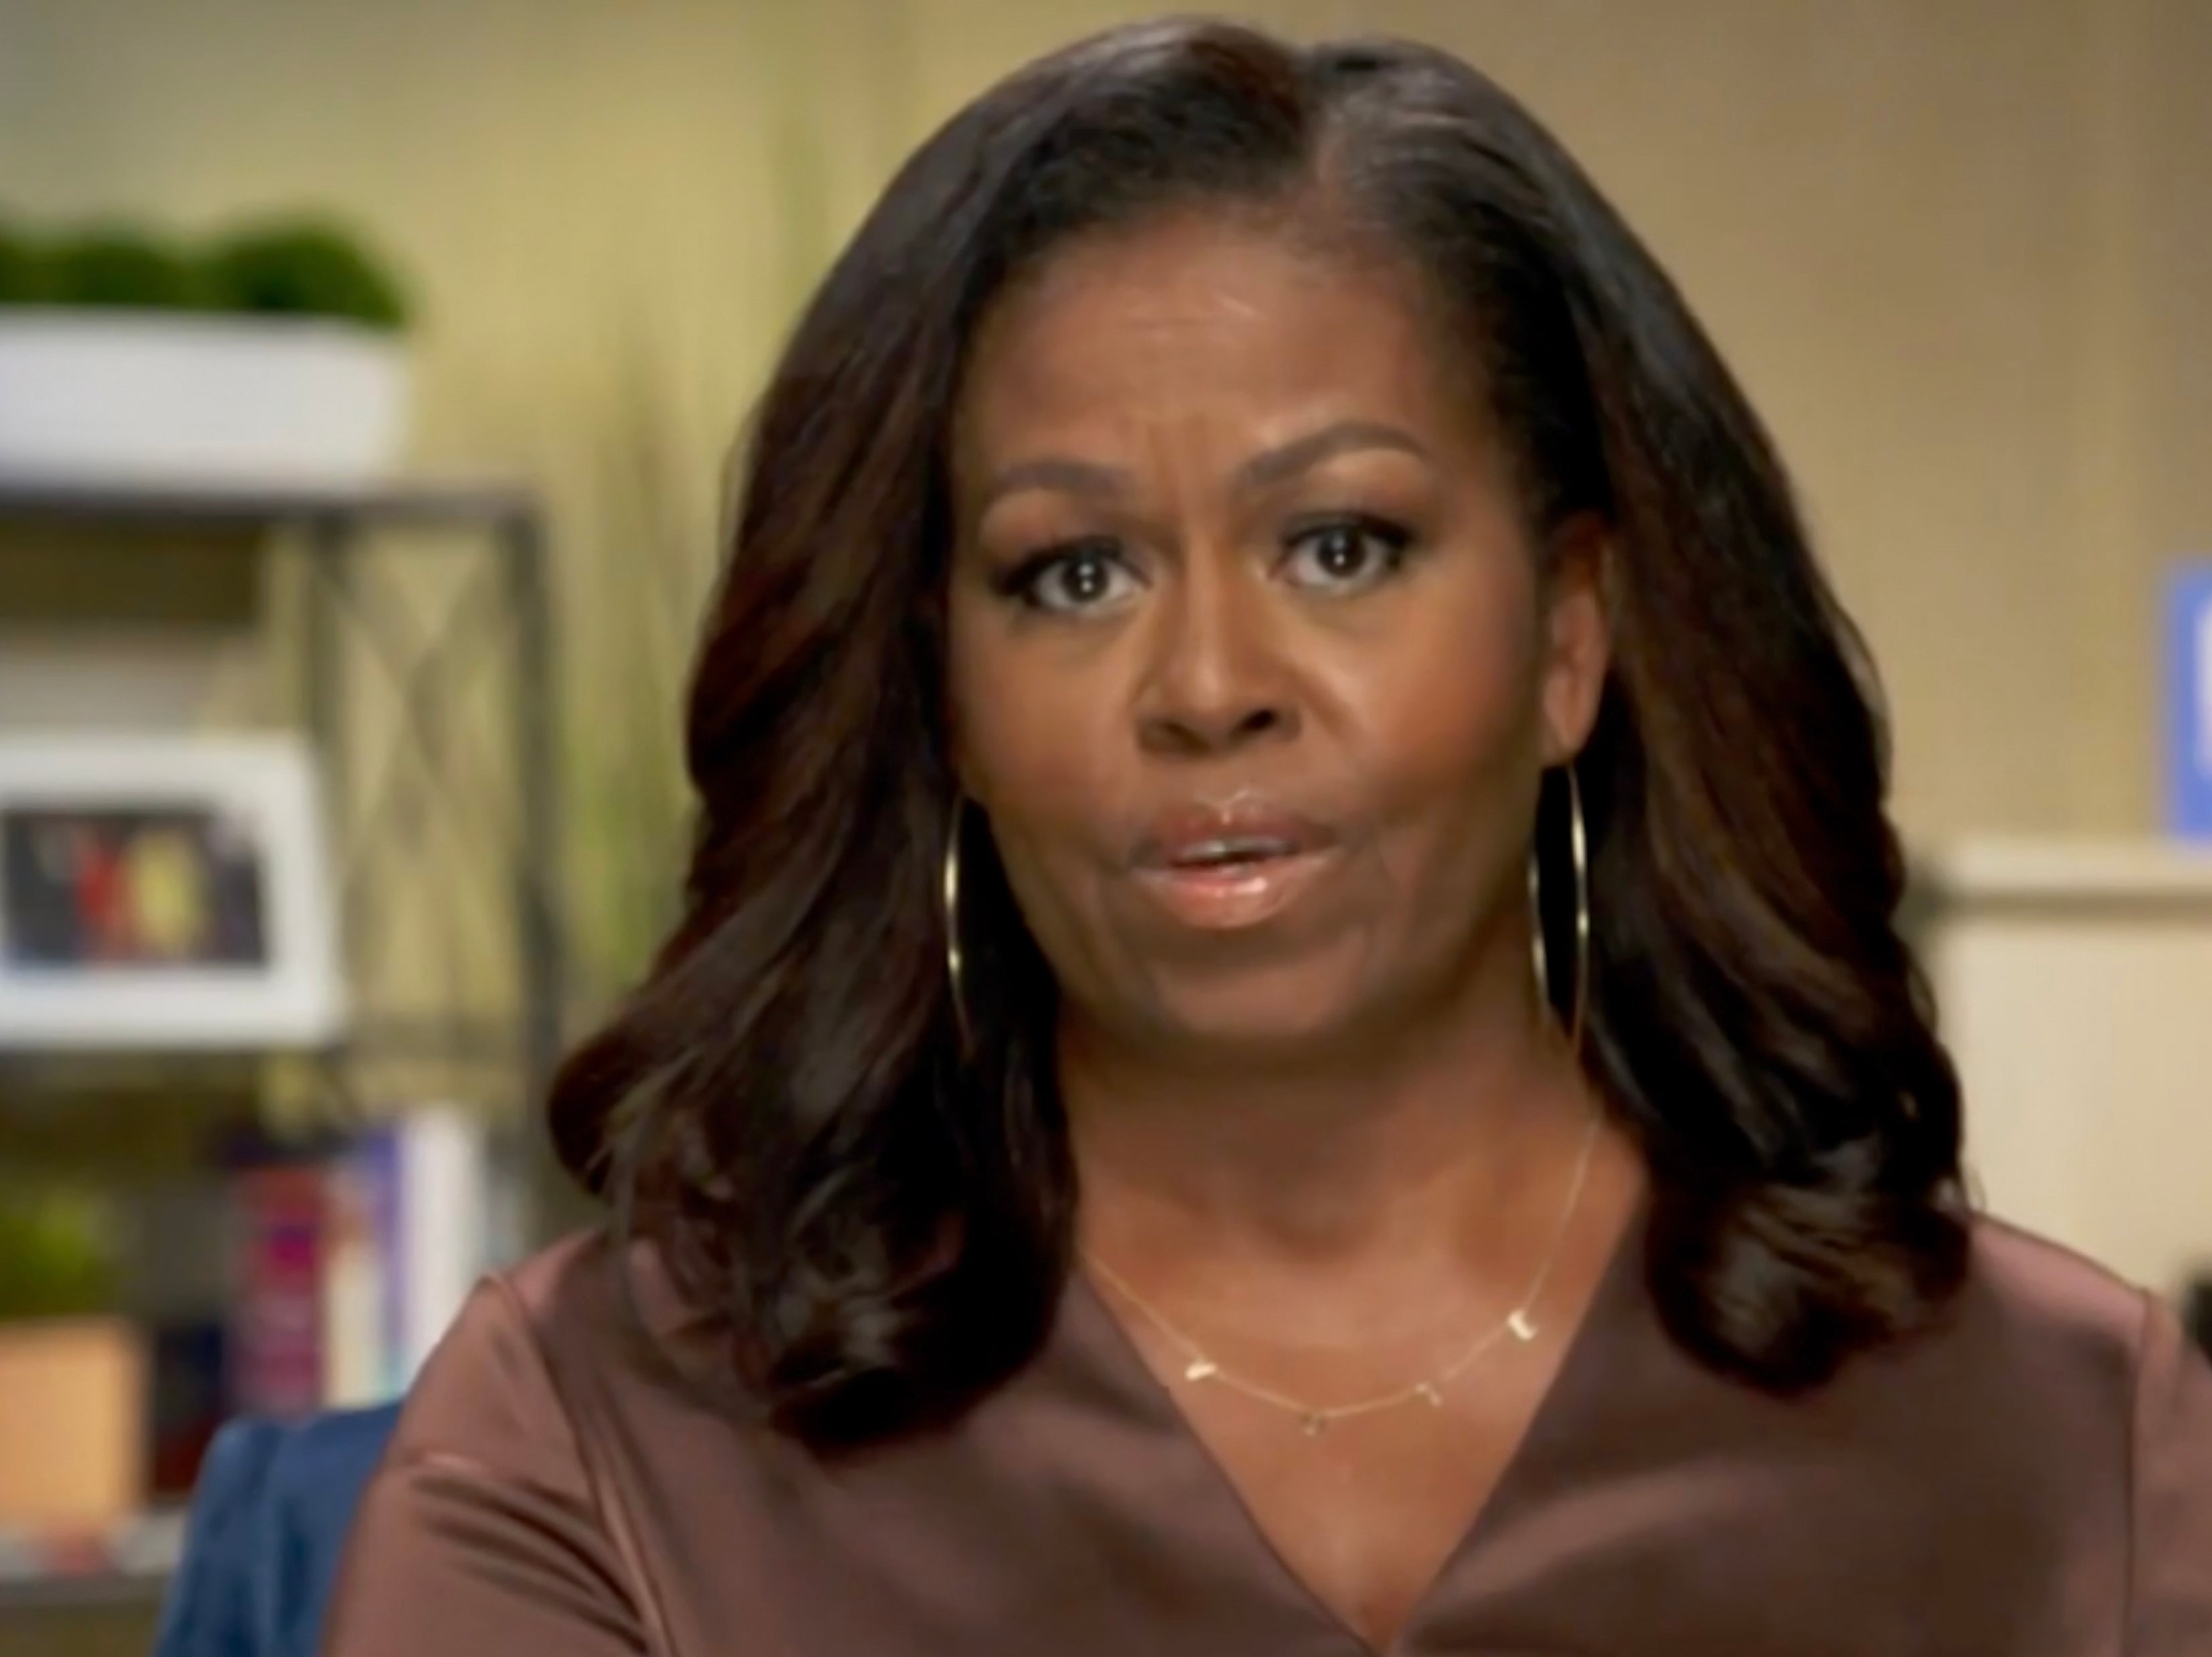 Michelle Obama on the Capitol Hill protests: ‘I hurt for our country’.